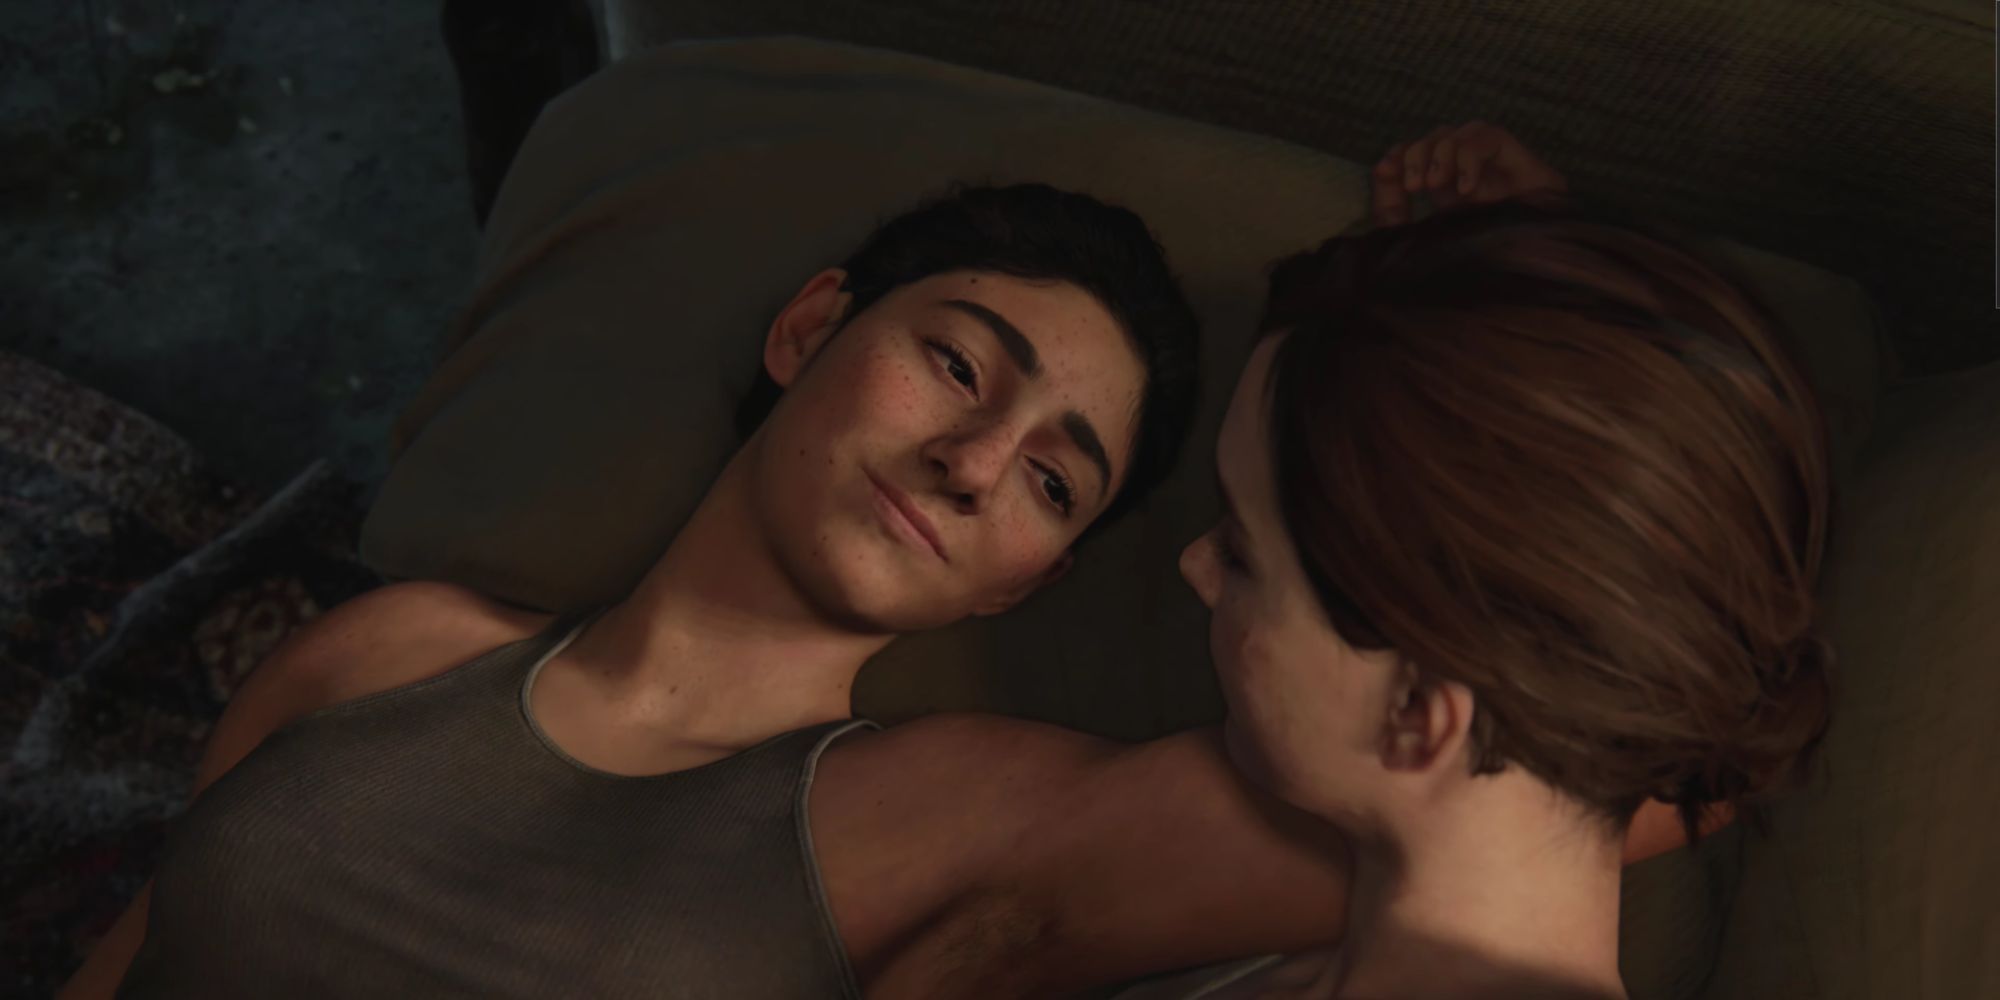 Ellie and Dina in The Last of Us Part 2.